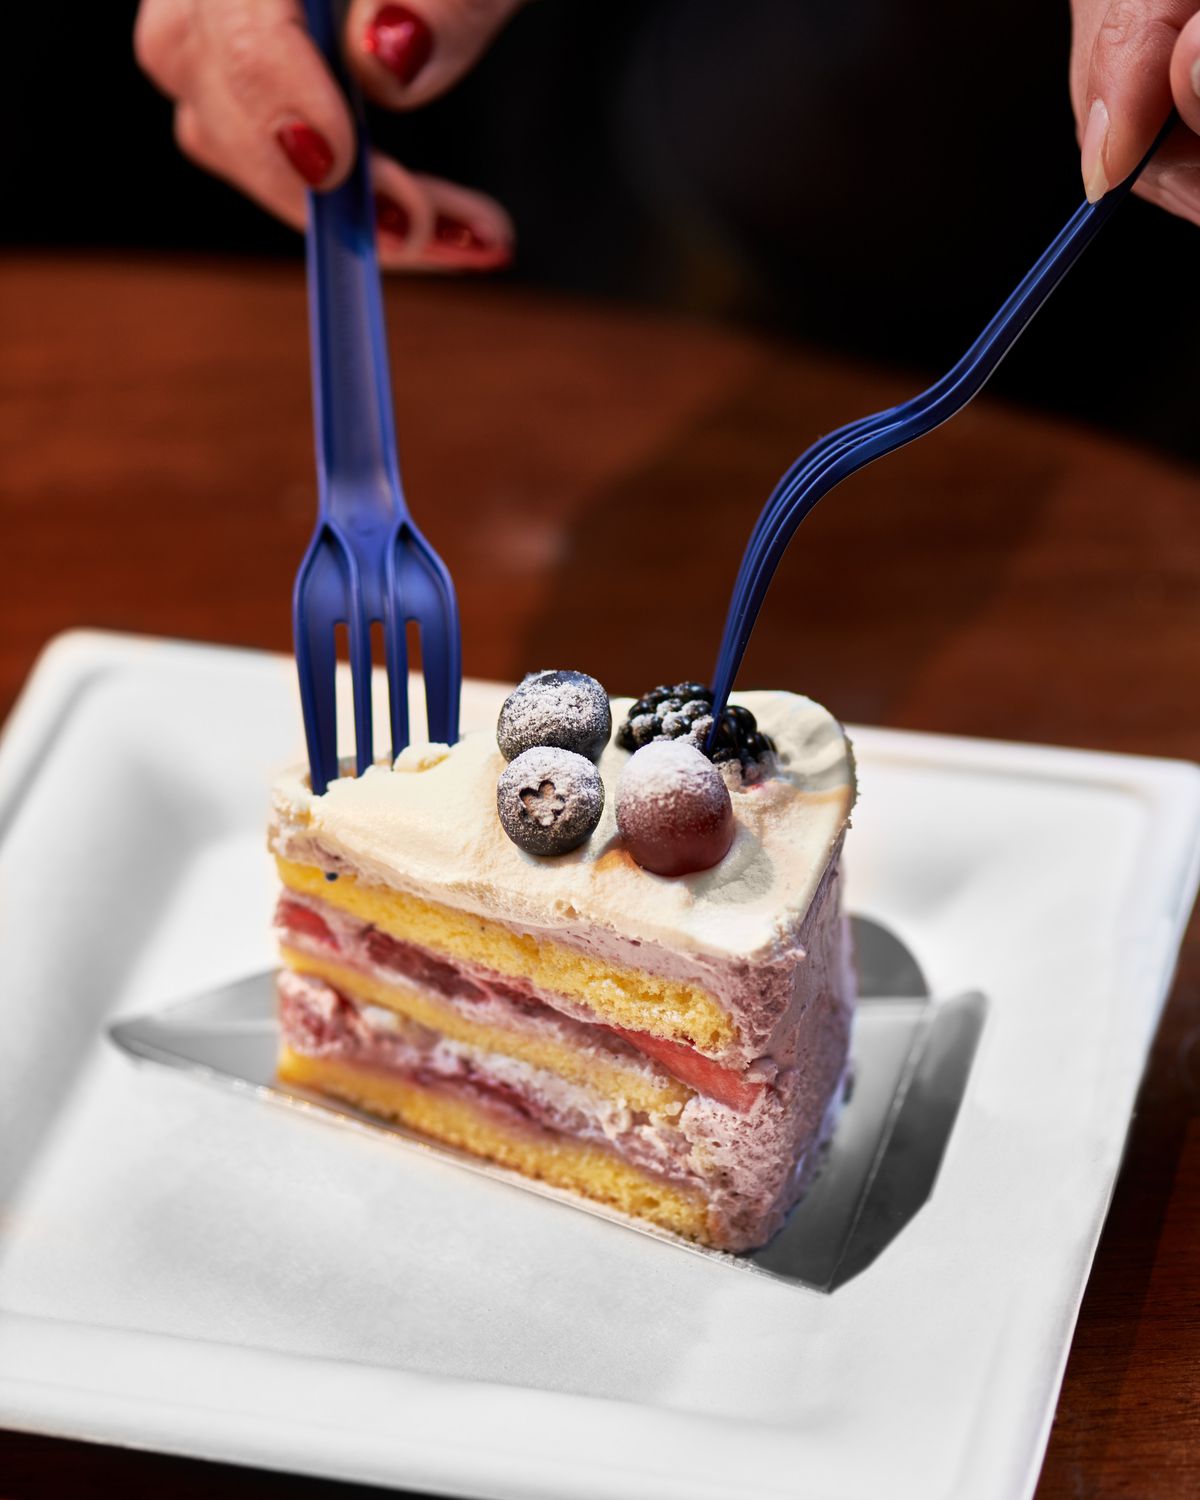 Two plastic forks stab into a slice of cake with berries on top and layers of berry filling.